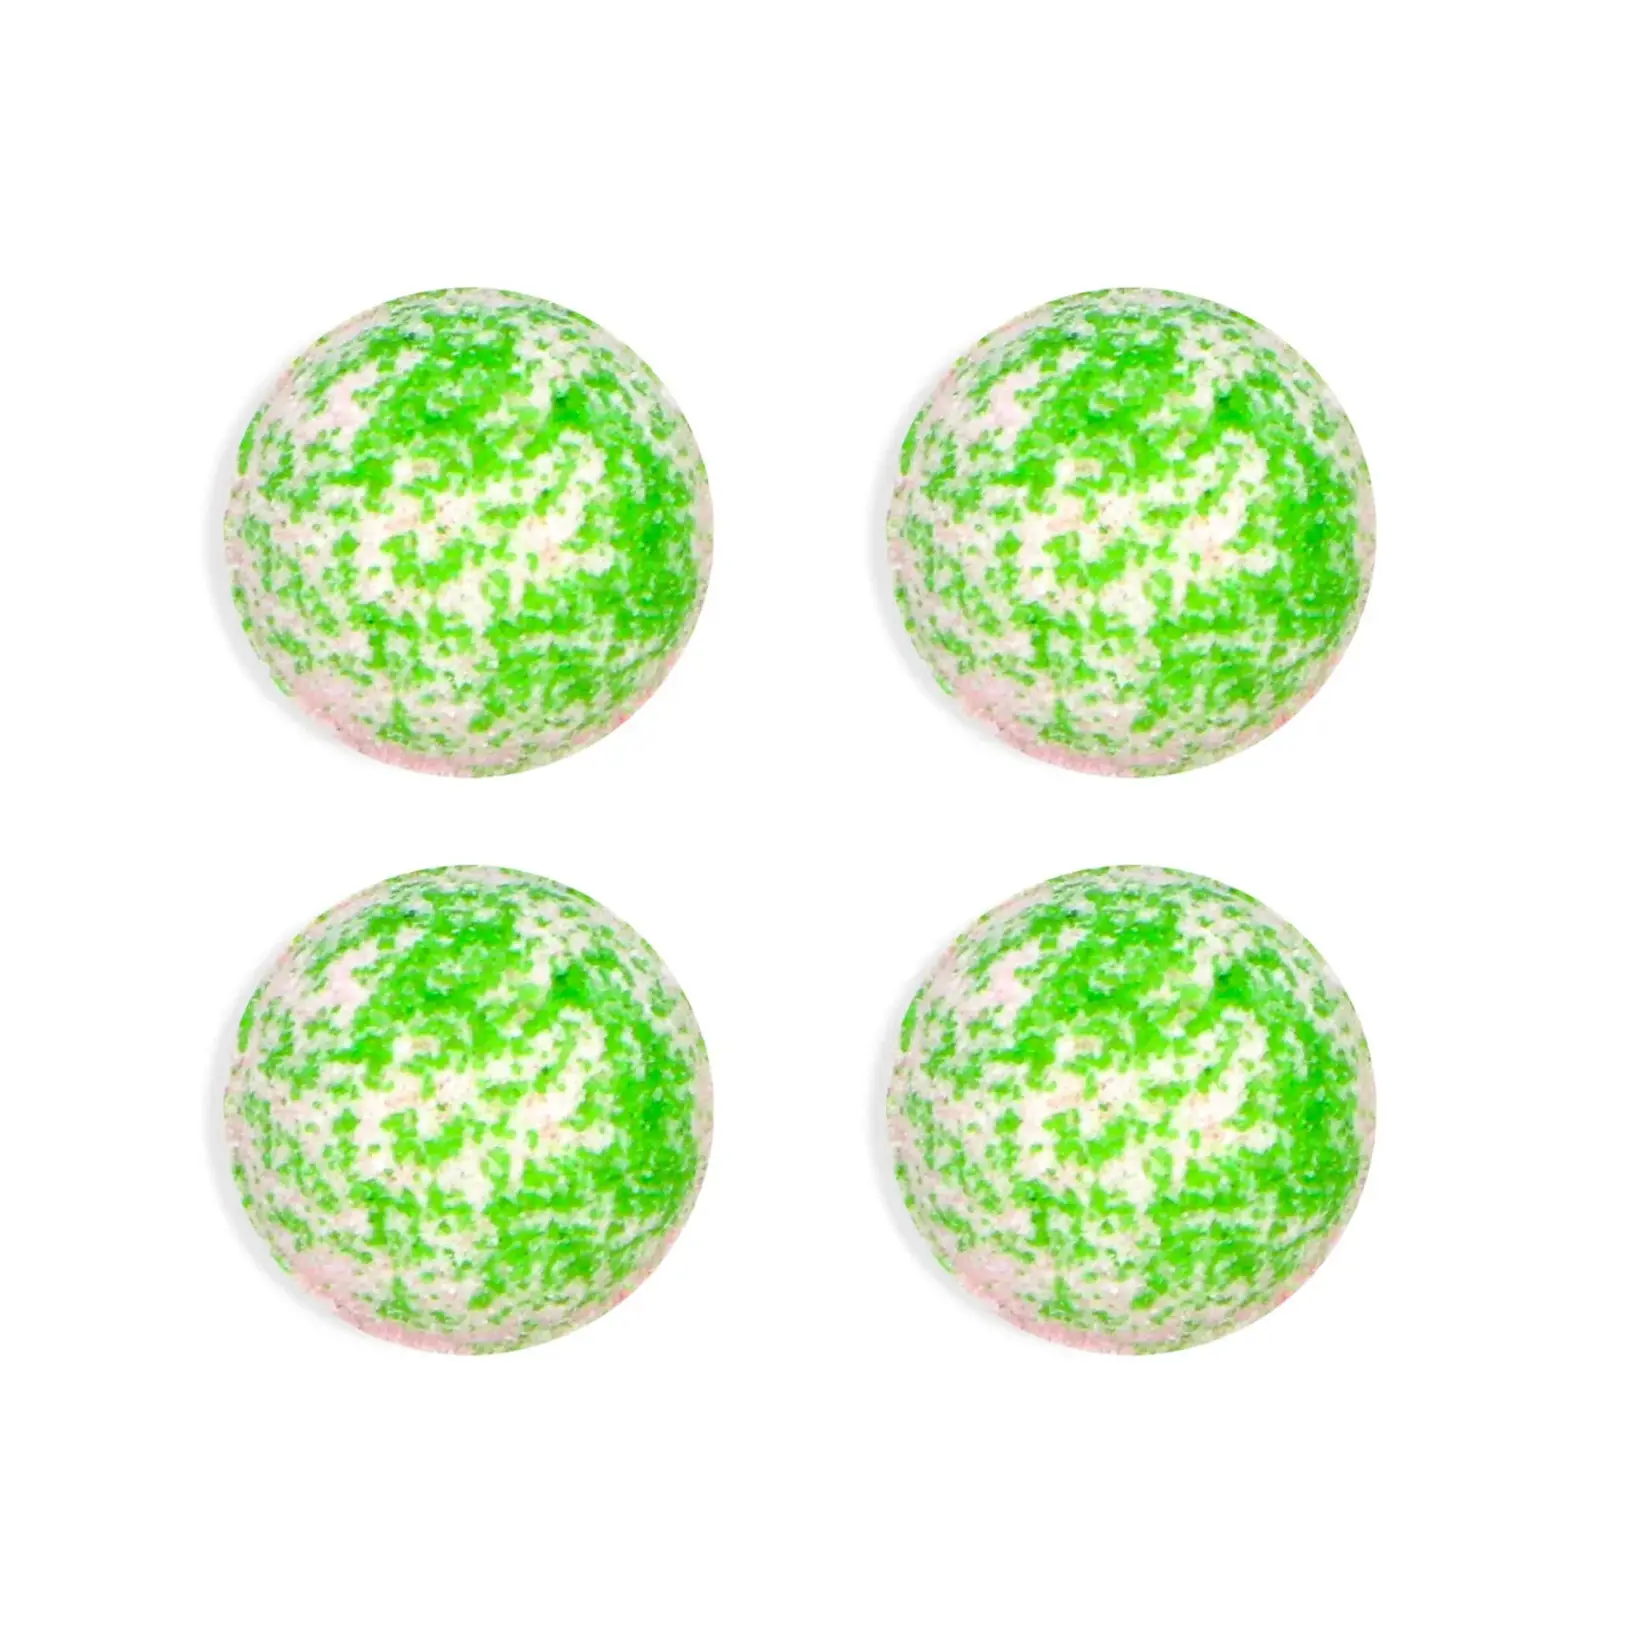 Cocktail Bomb Guava Lime Cocktail Bomb - 4 Pack